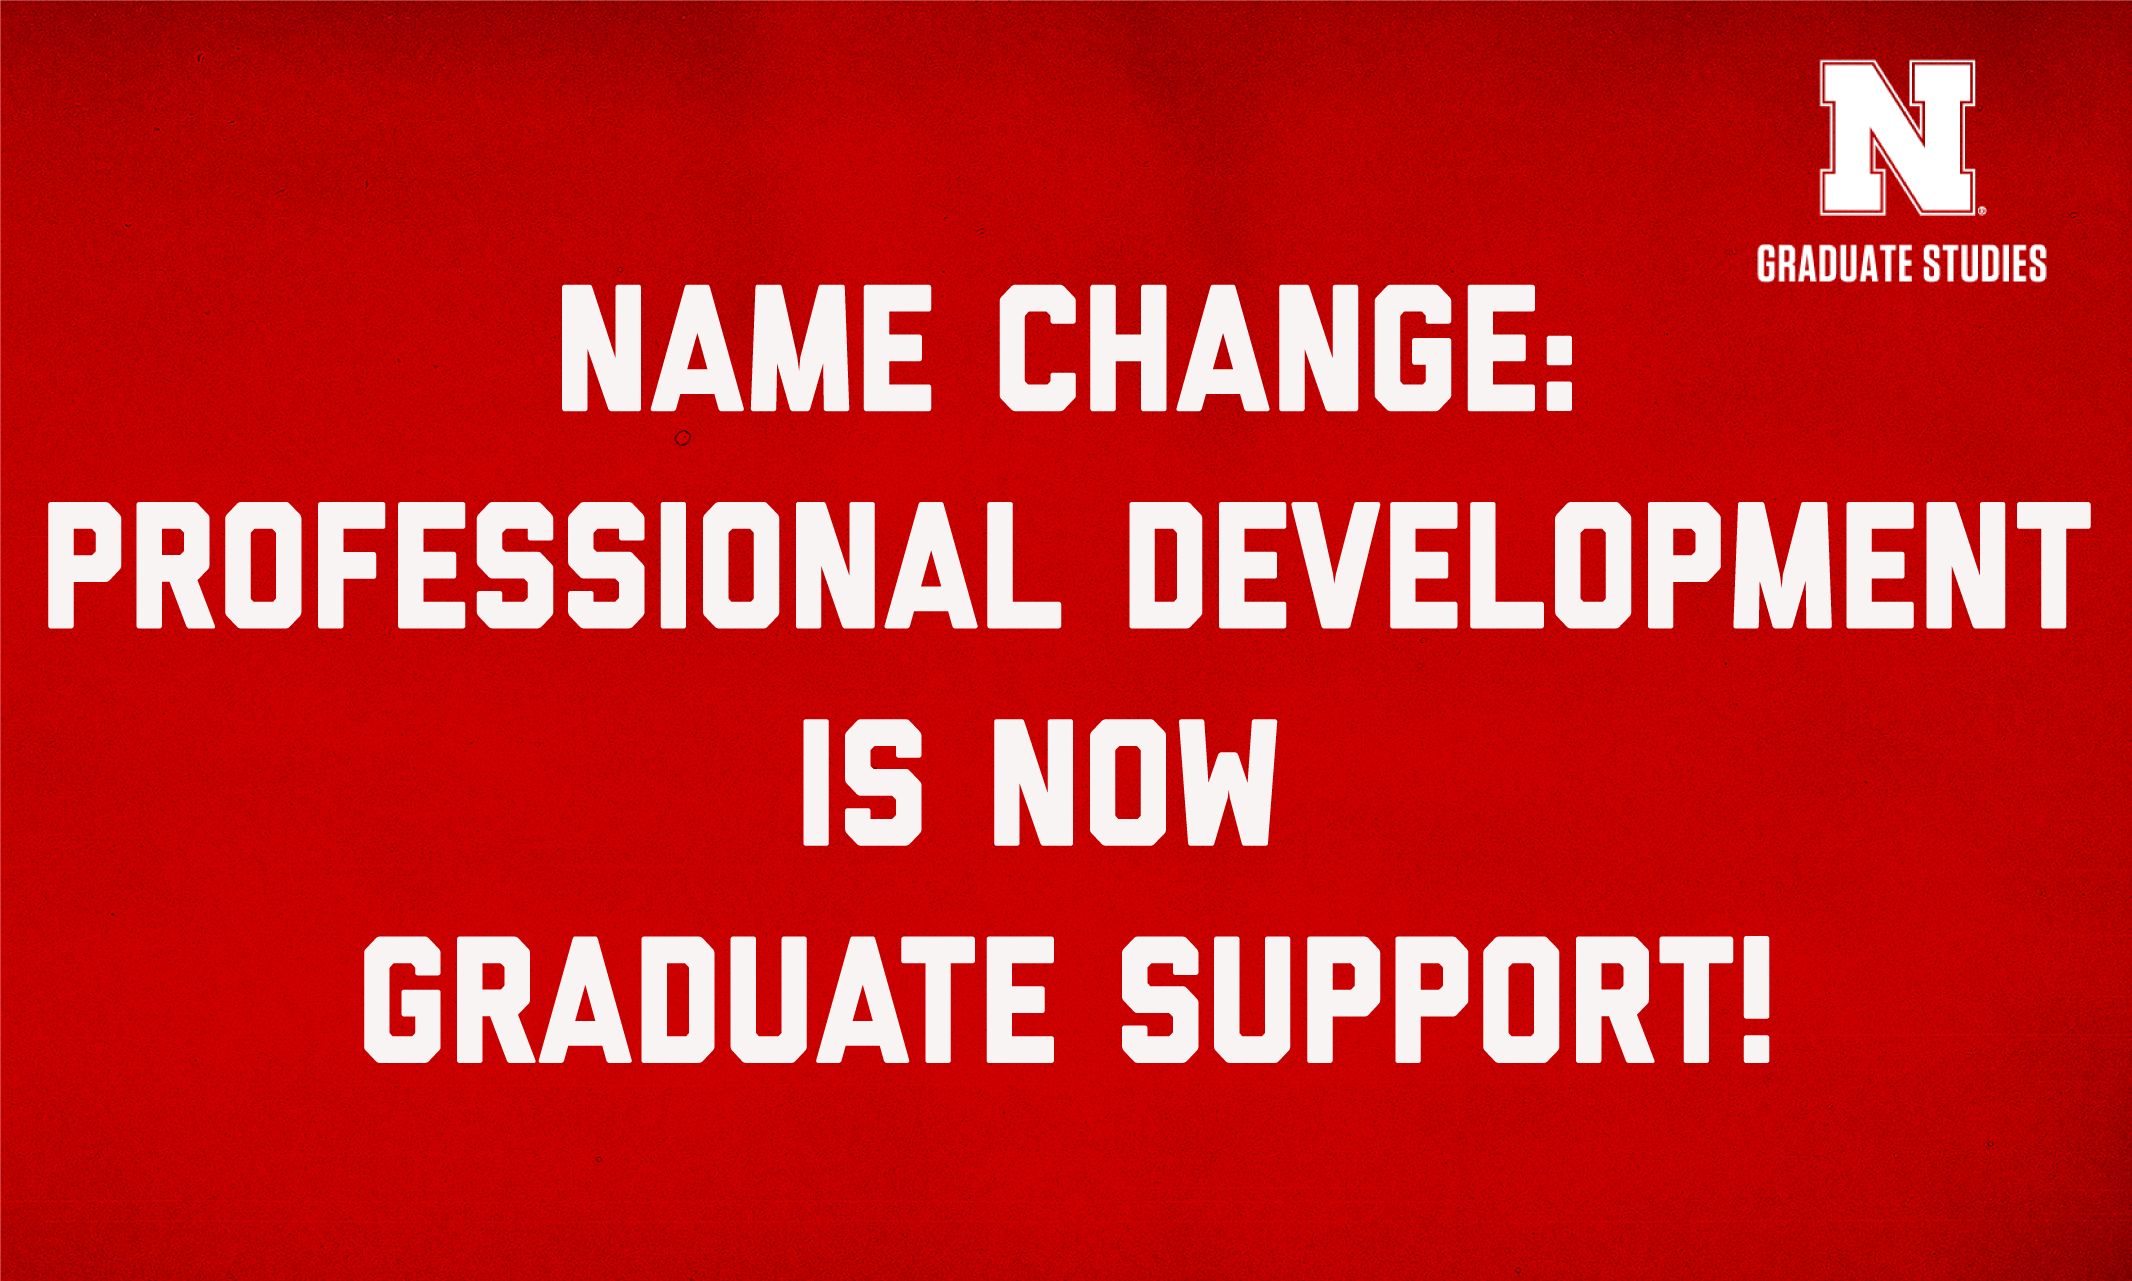 Name Change: Professional Development is now Graduate Support!